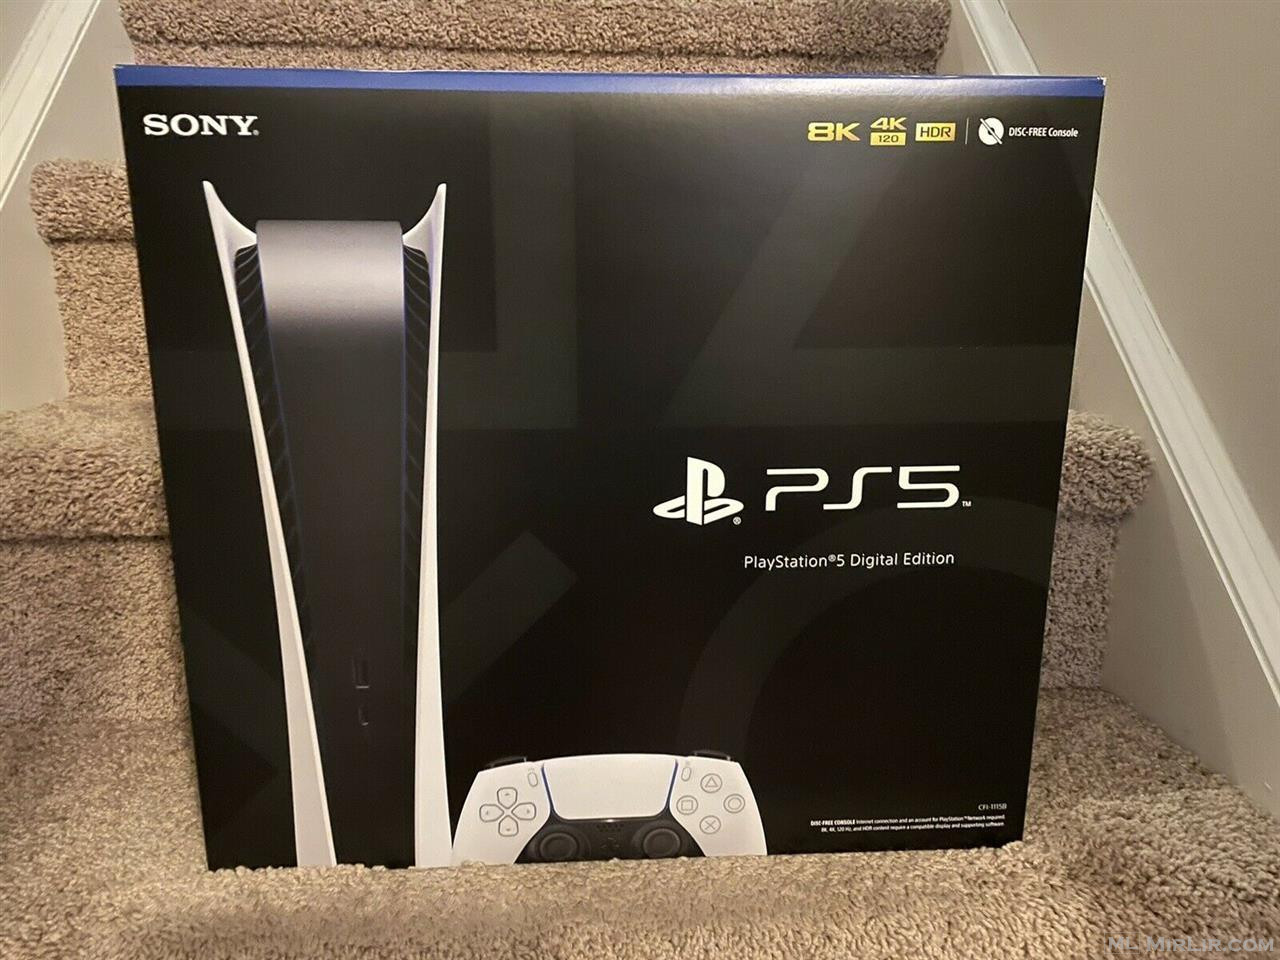 NEW Sony Playstation PS 5 Digital Edition Console